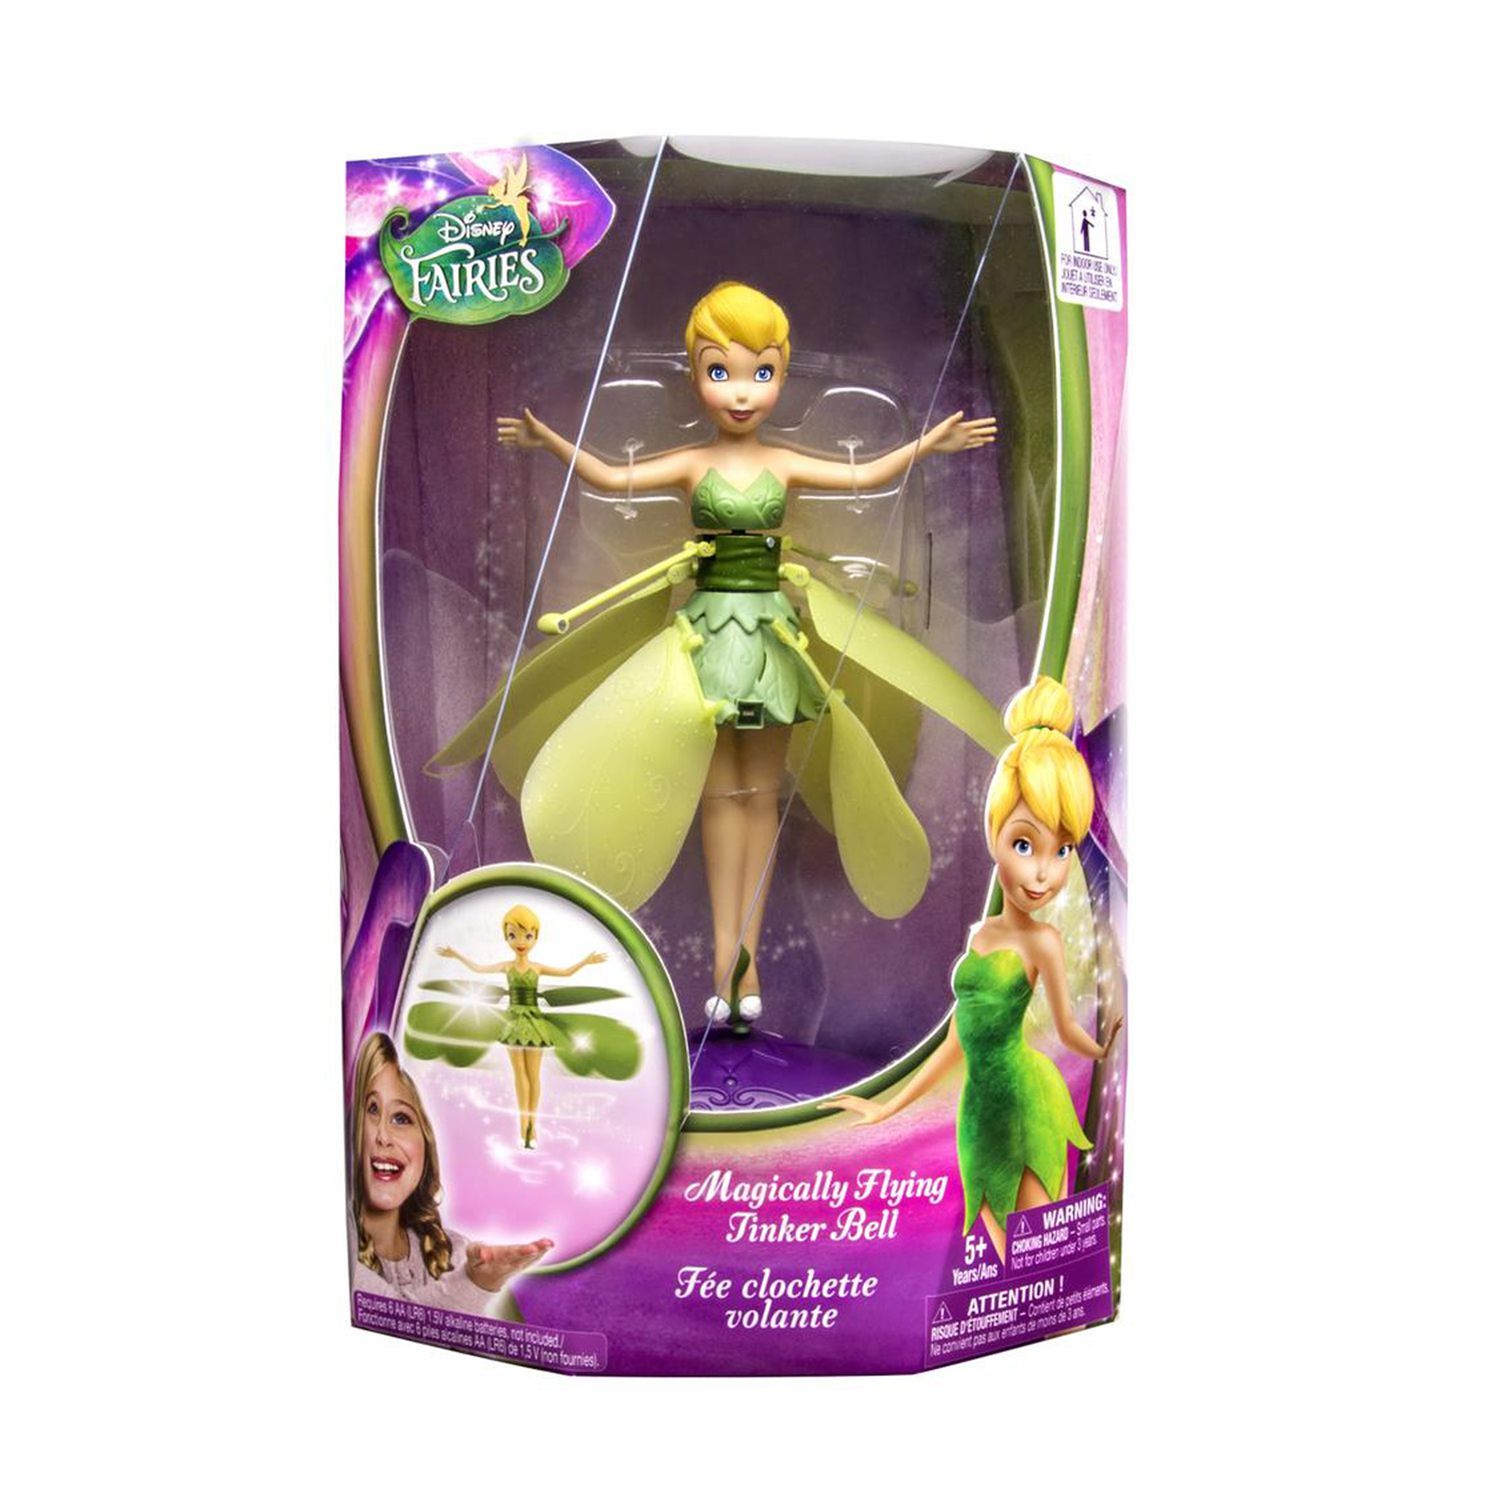 now sparkle flying fairy toy